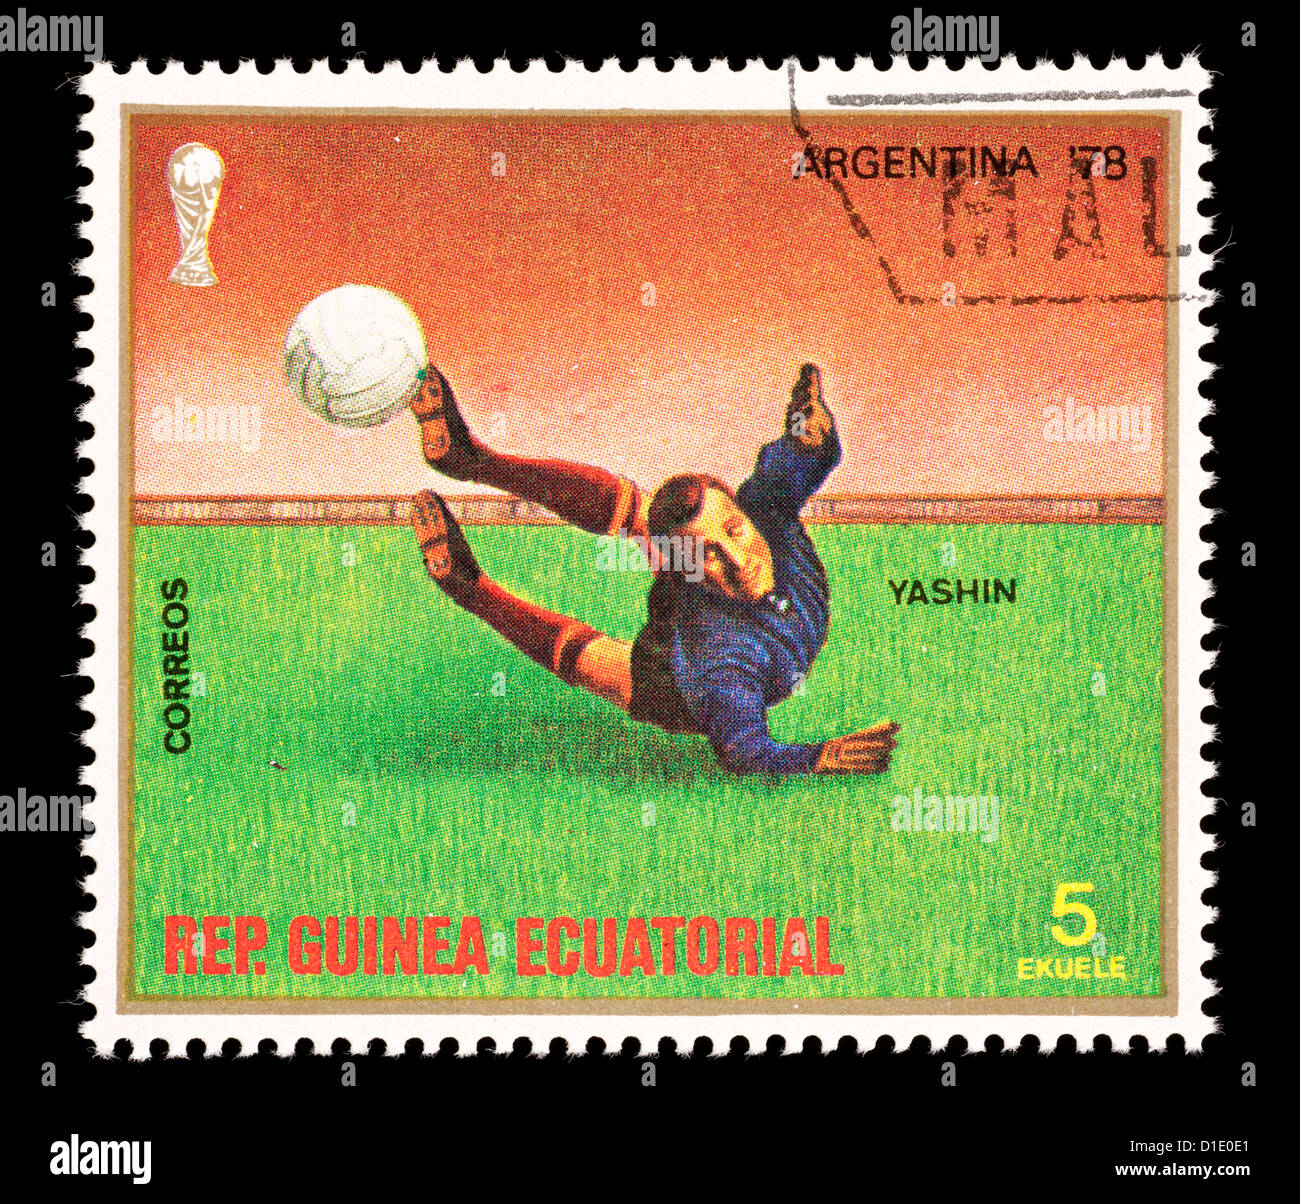 Postage stamp from Equatorial Guinea depicting a soccer goalkeeper, issued for the 1978 Soccer World Cup in Argentina. Stock Photo